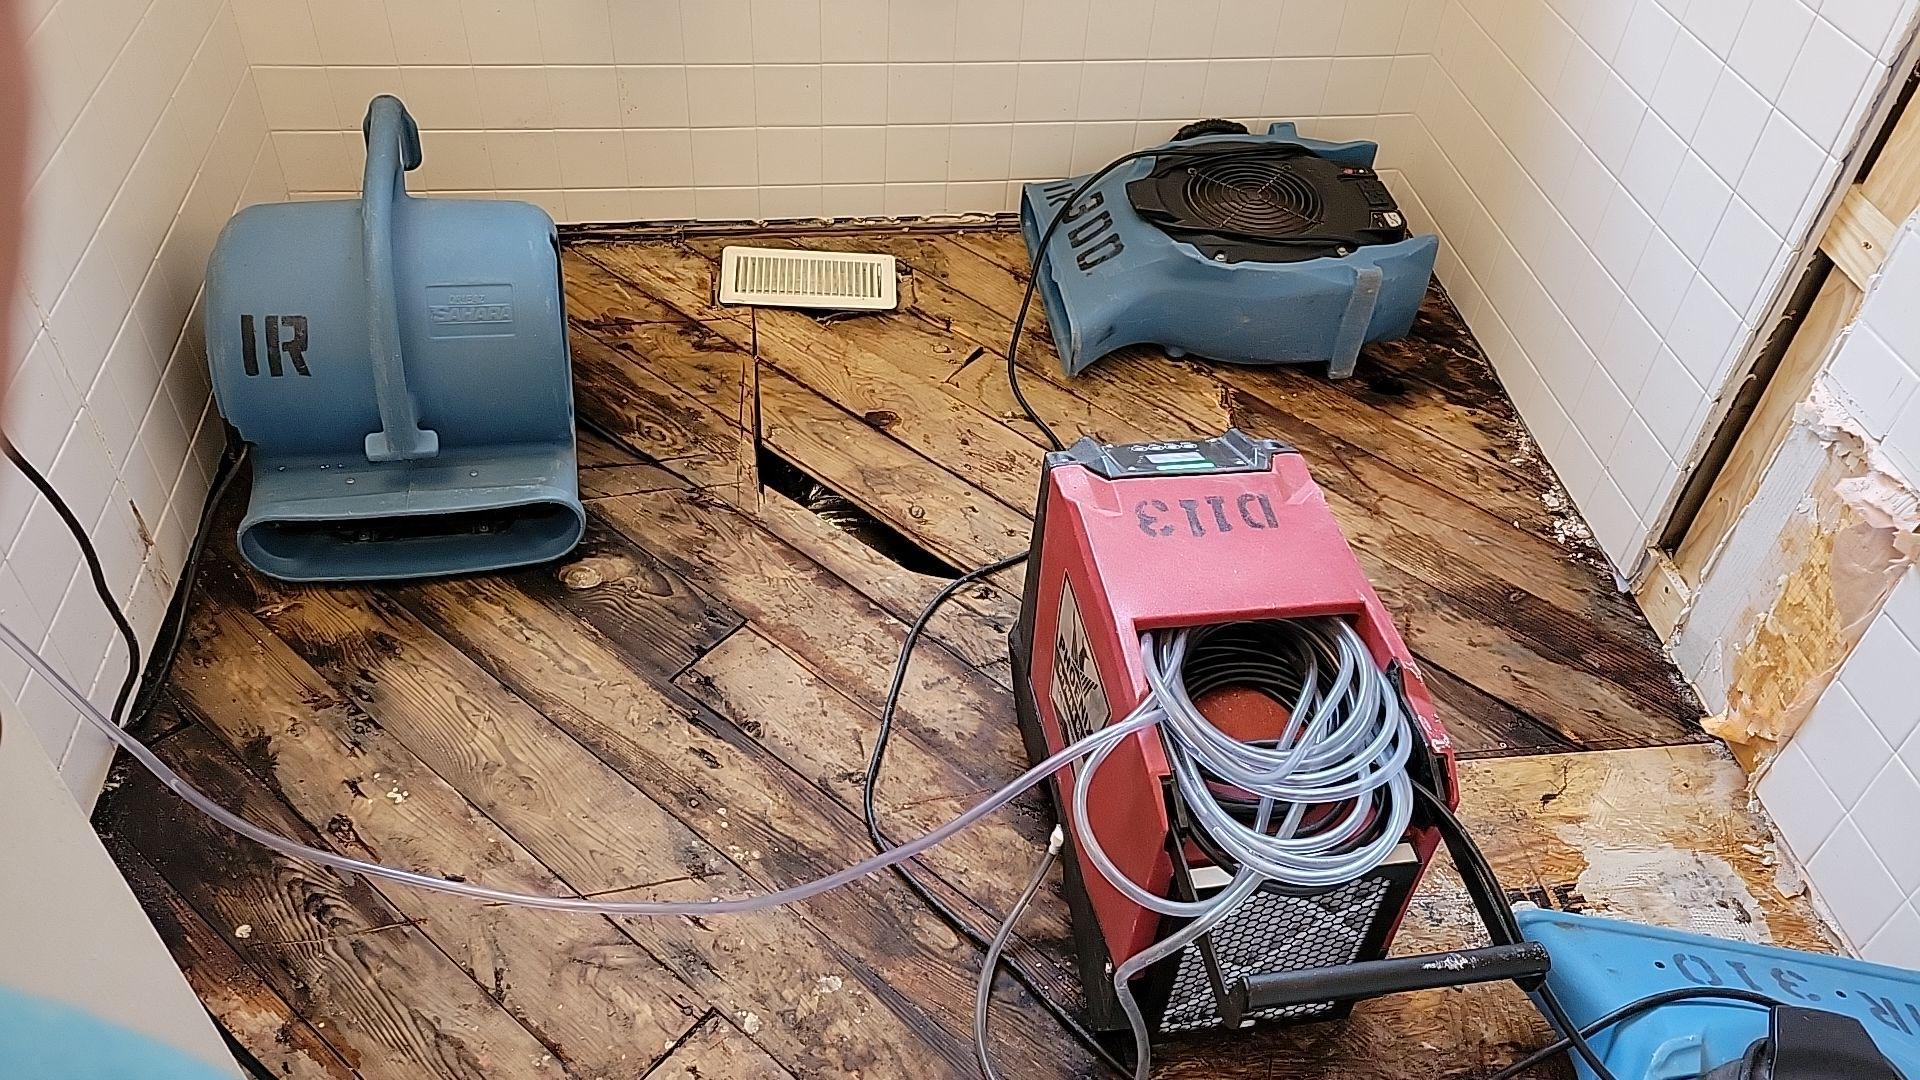 All bathroom floor and walls removed, drying equipment set up.